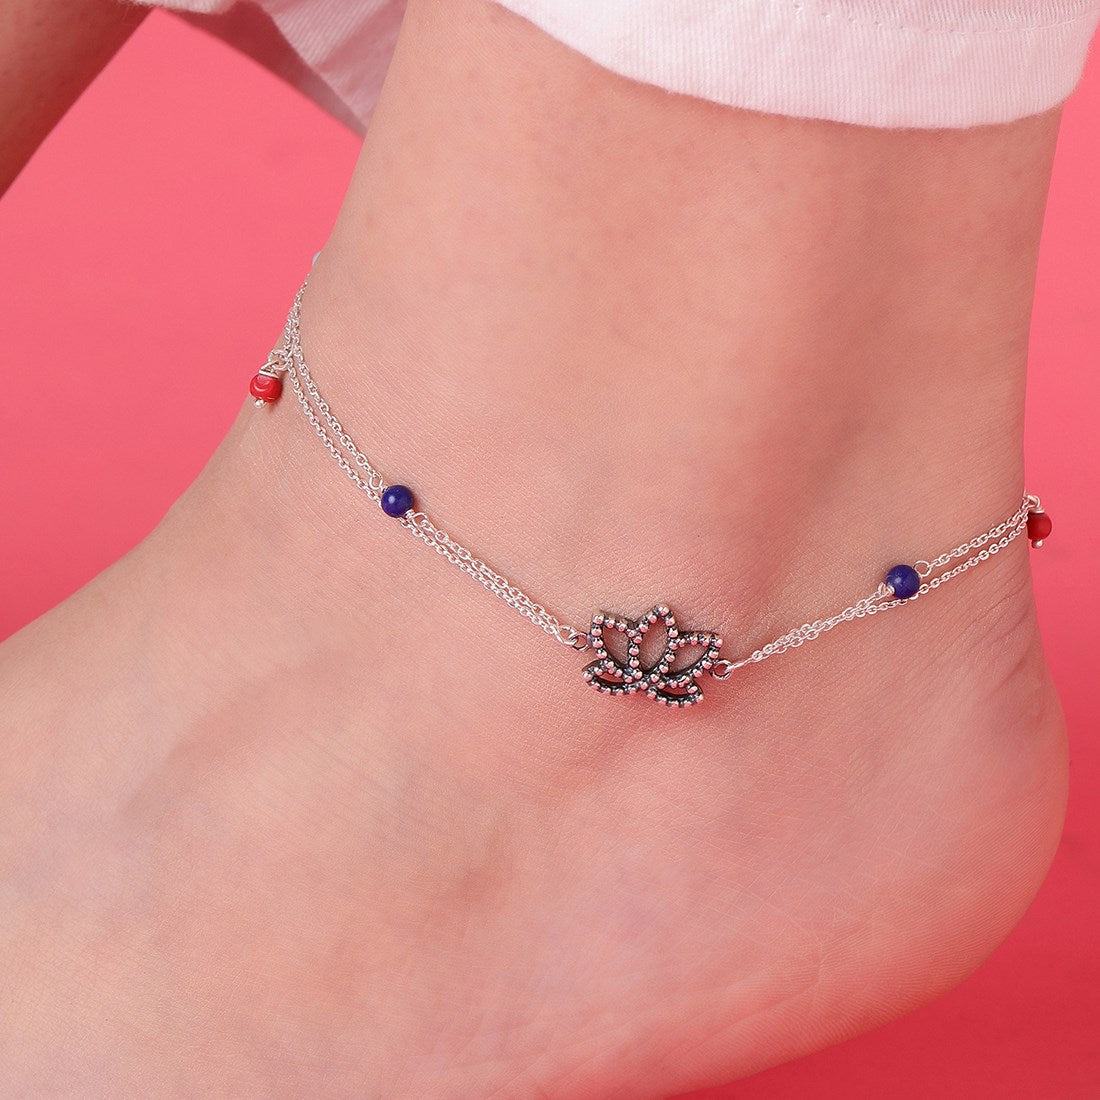 Lotus Blossom 925 Sterling Silver Anklet with Colorful Beads